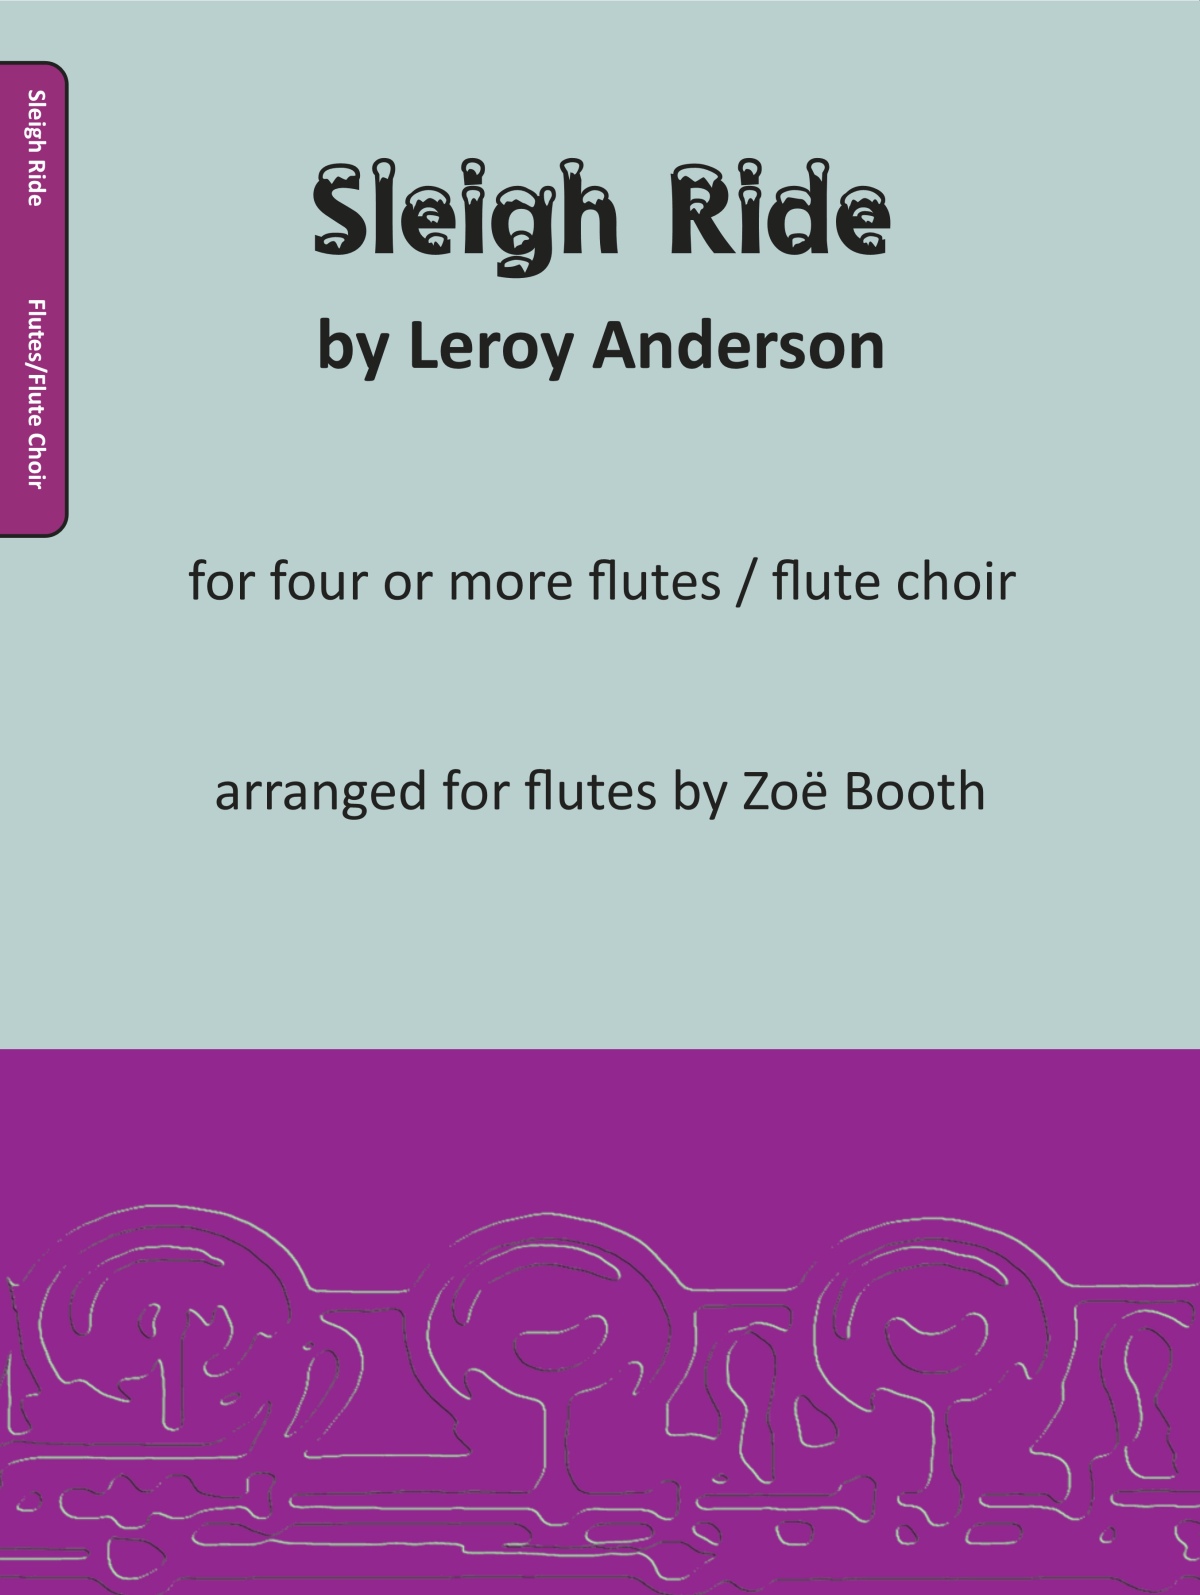 Sleigh Ride by Leroy Anderson,  arranged by Zoë Booth for four or more flutes/flute choir